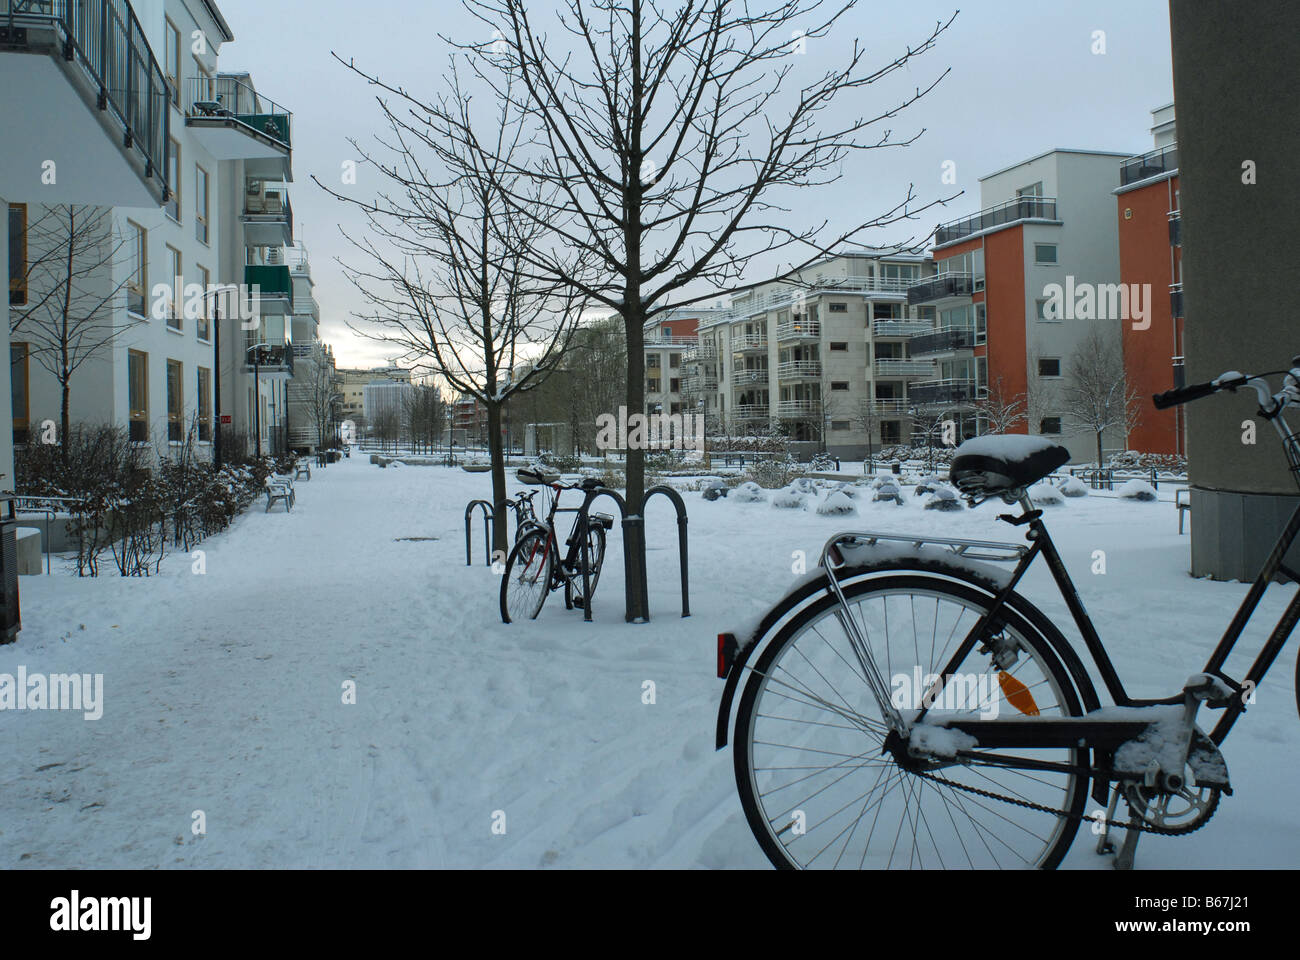 Bicycles parked along a snow covered street in the Hammarby sjöstad district of Stockholm in Sweden Stock Photo